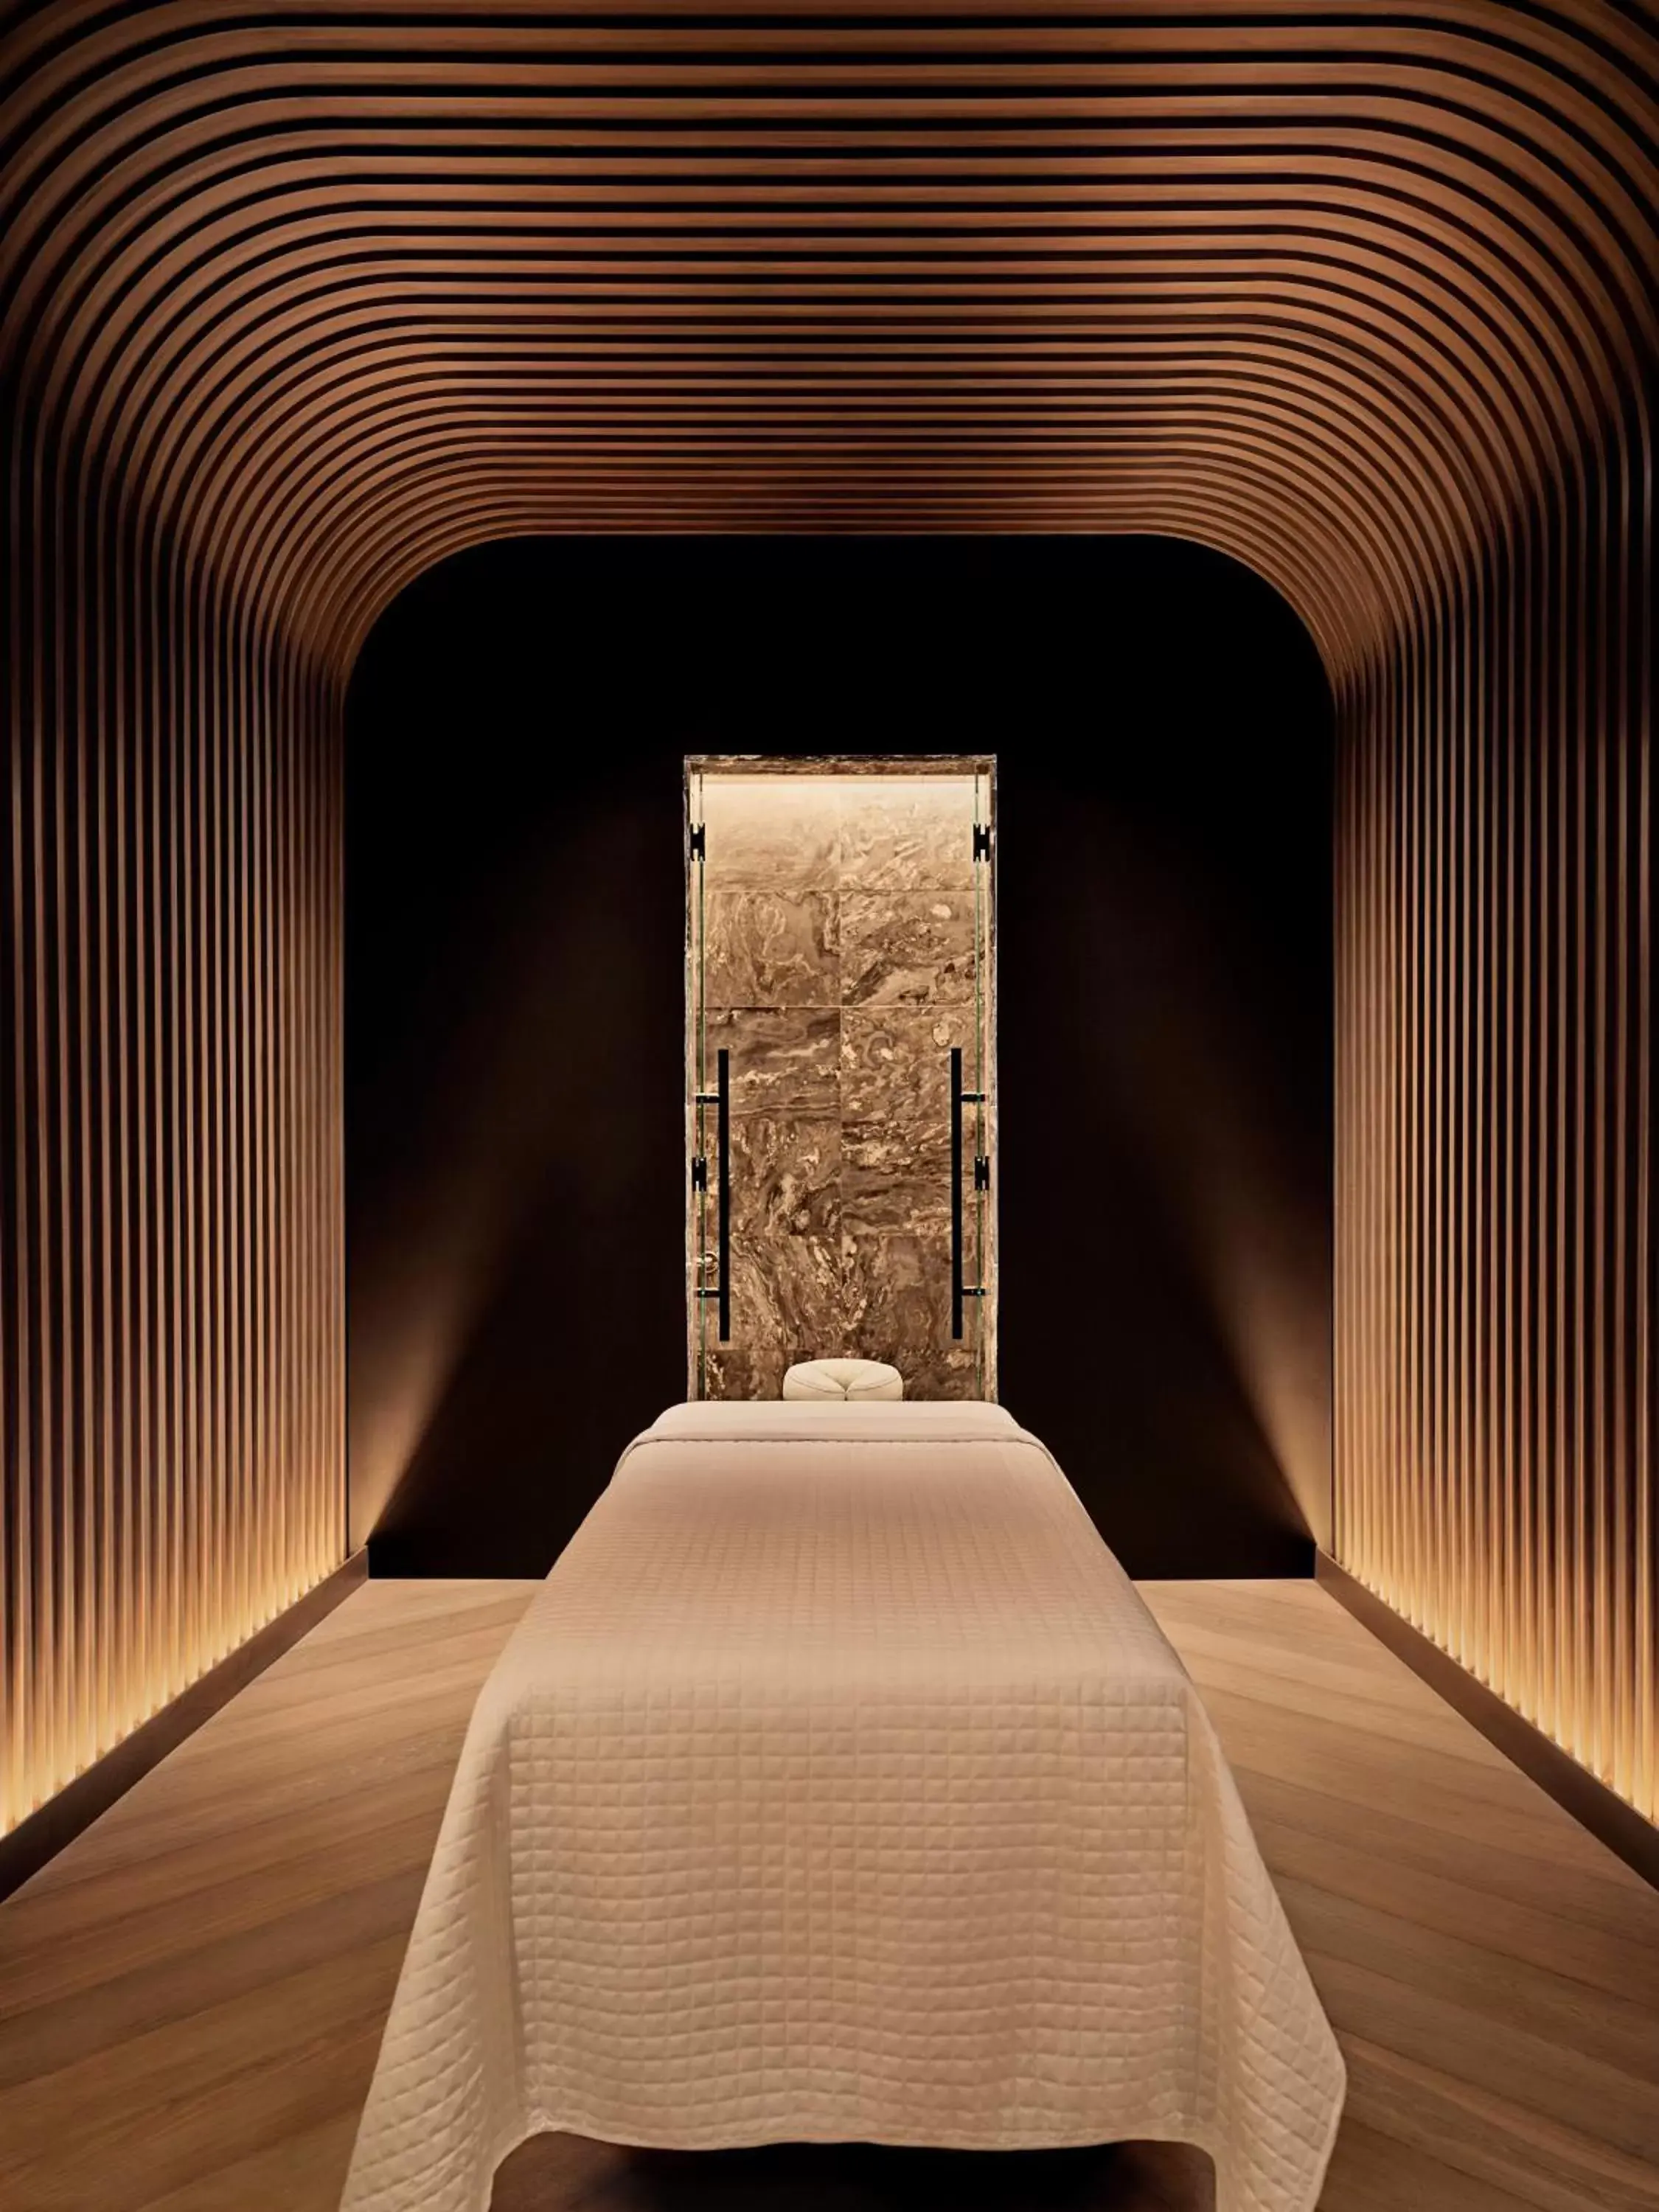 Spa and wellness centre/facilities in Equinox Hotel Hudson Yards New York City